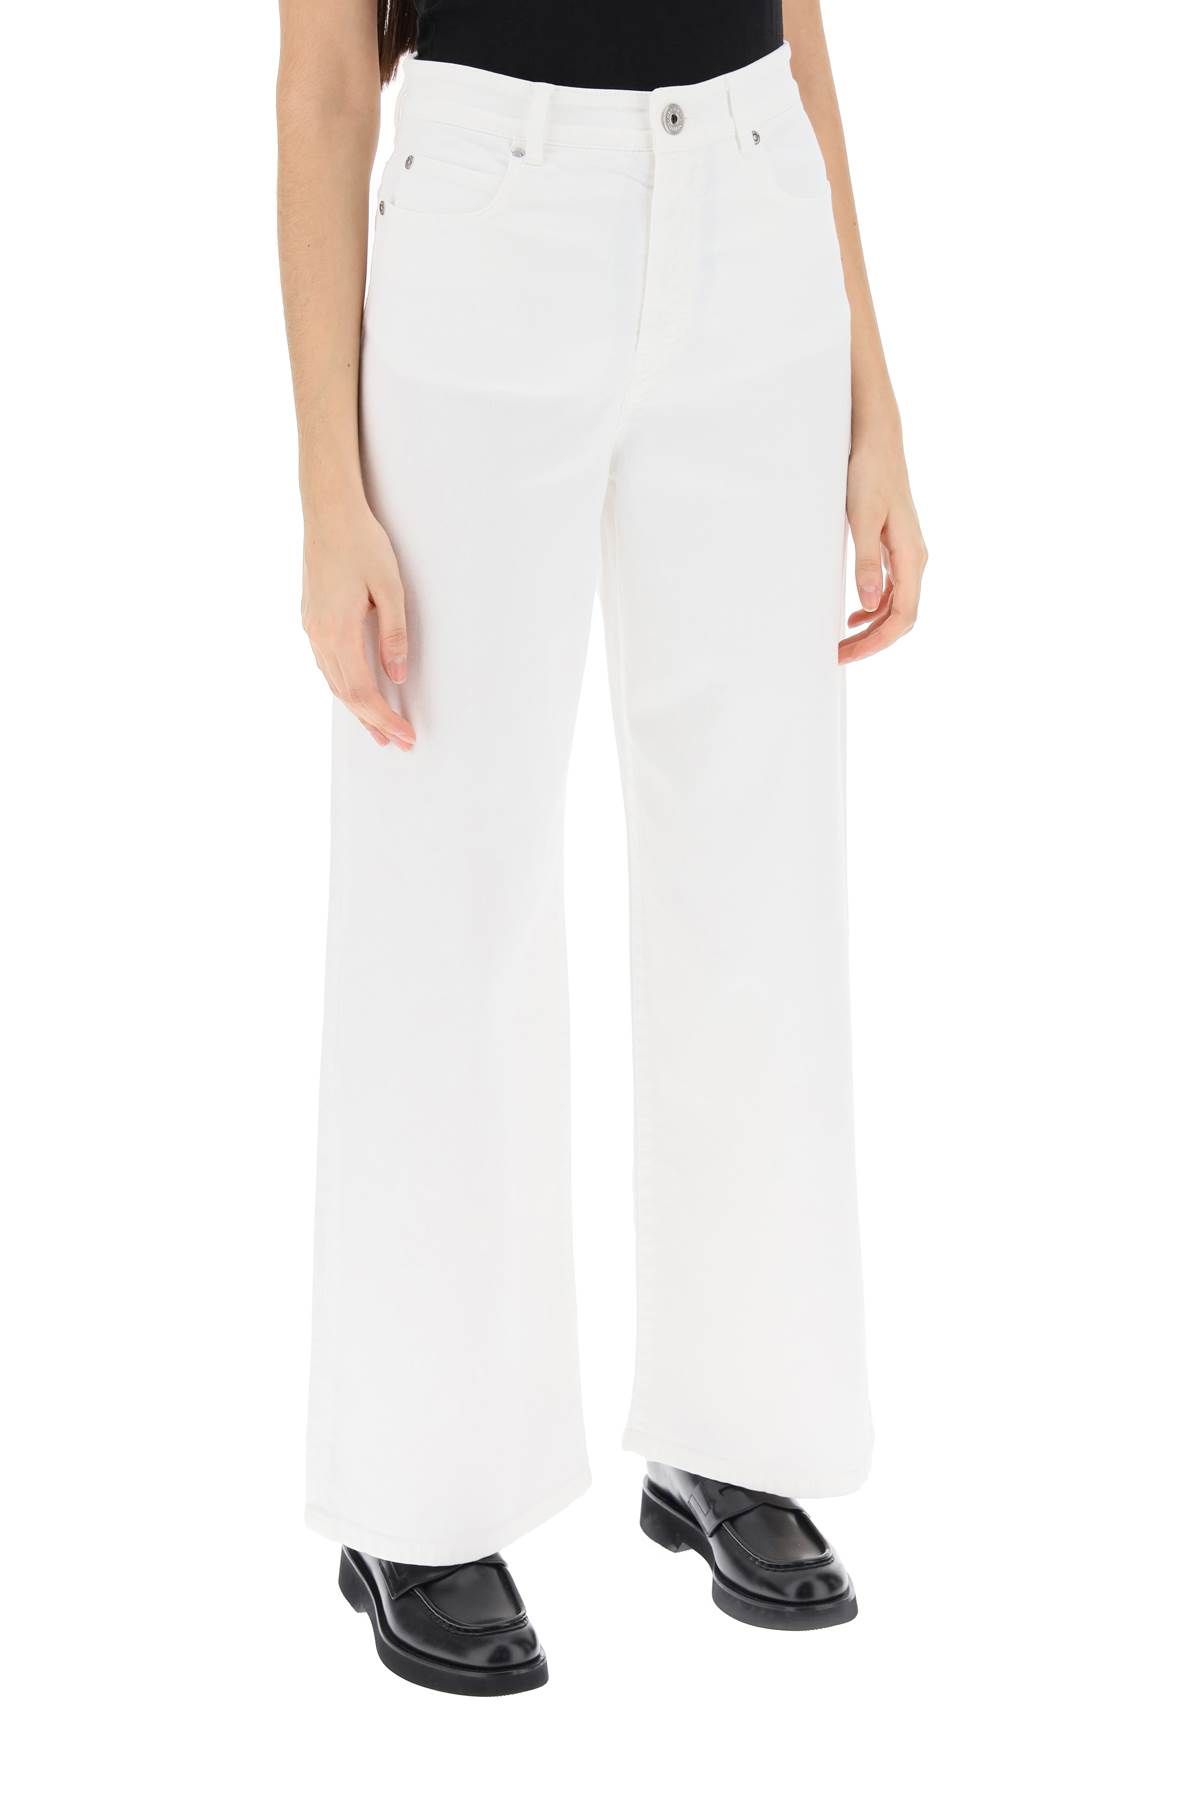 Shop Weekend Max Mara Cropped Cotton Pants For Women In White